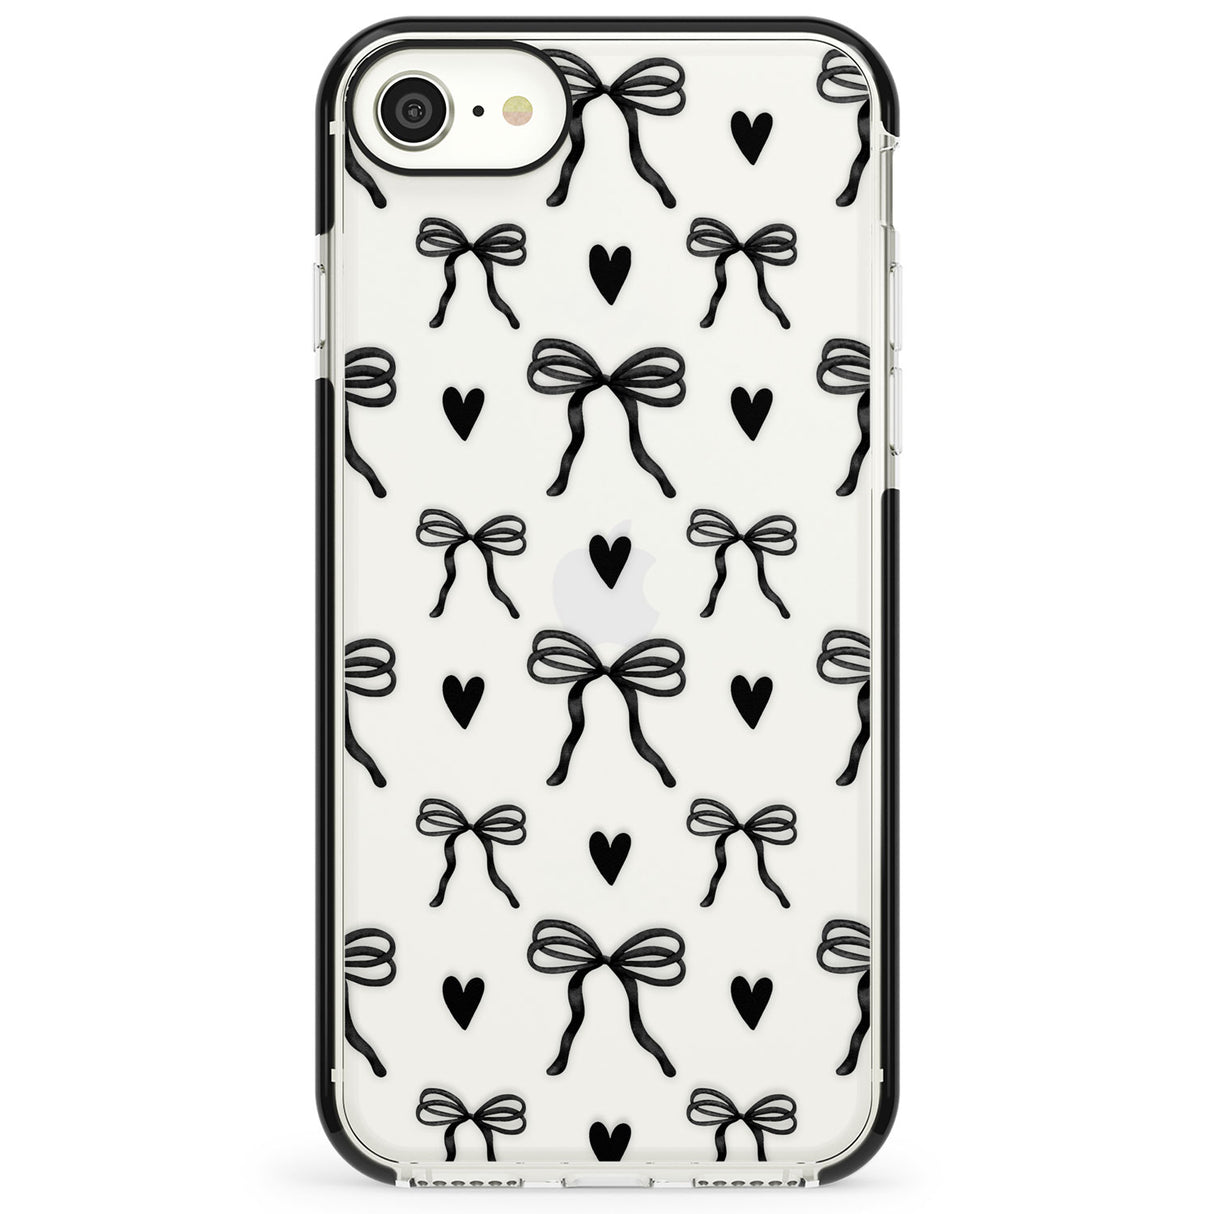 Black Bows & Hearts Impact Phone Case for iPhone SE